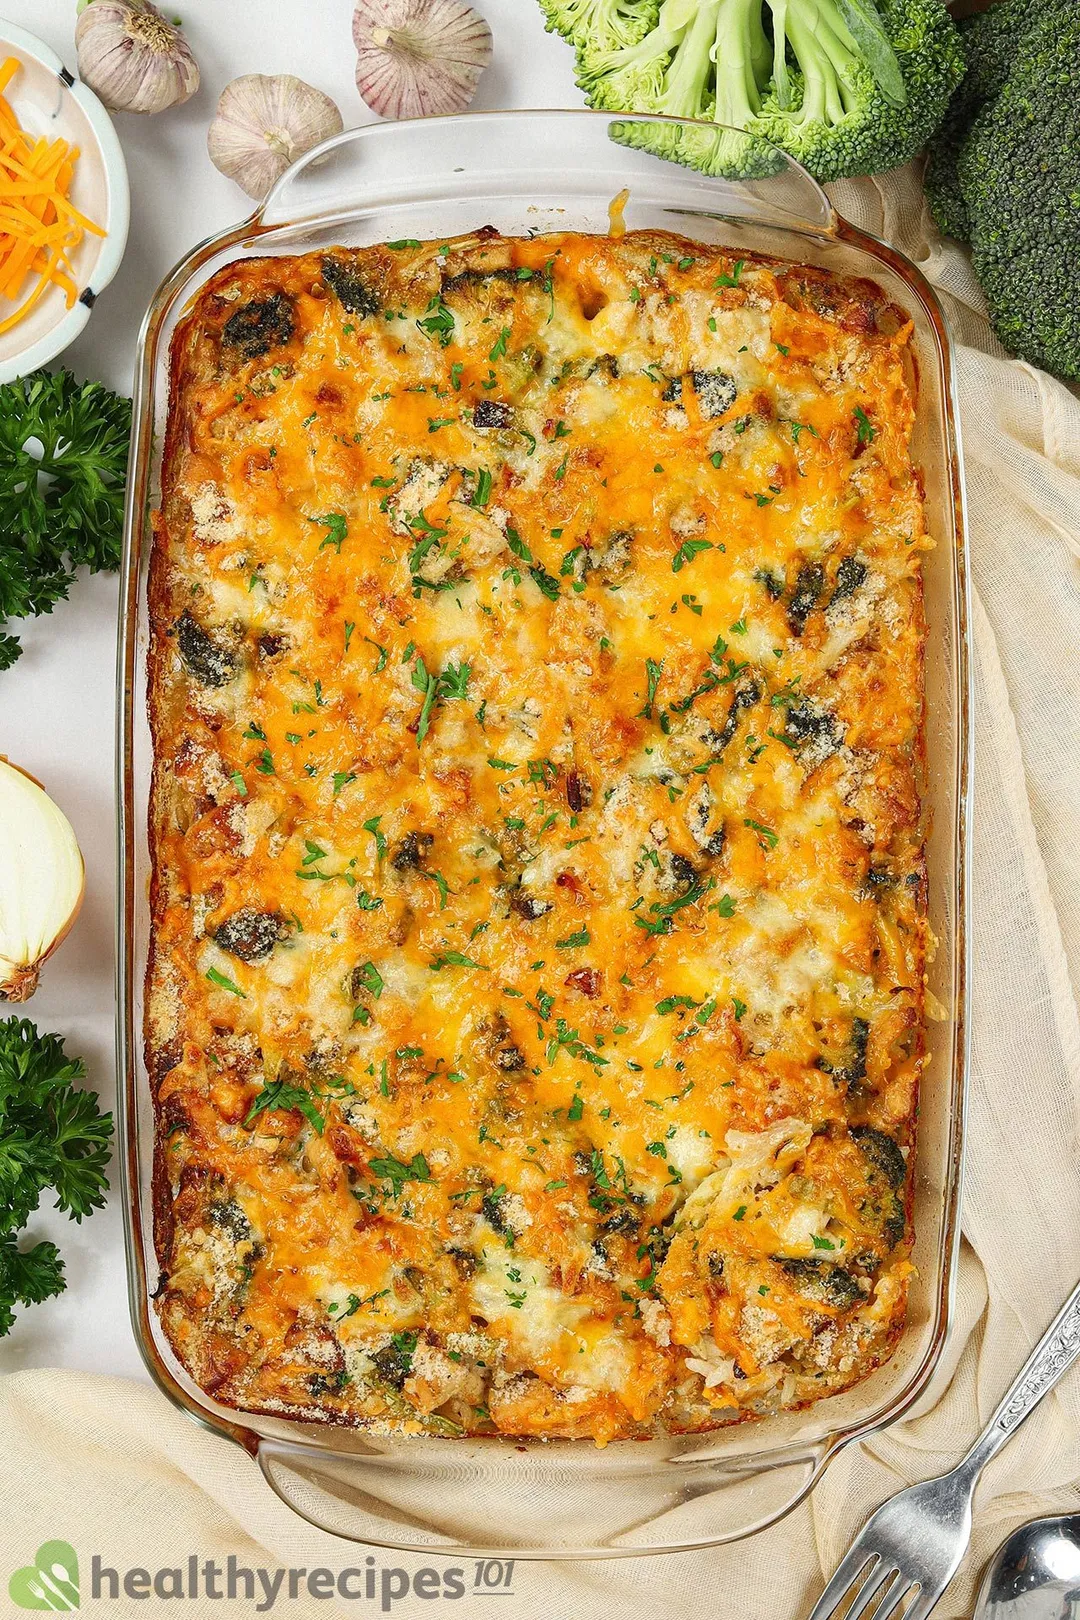 A rectangular casserole dish filled with a colorful array of fresh veggies topped with melted cheese and herbs